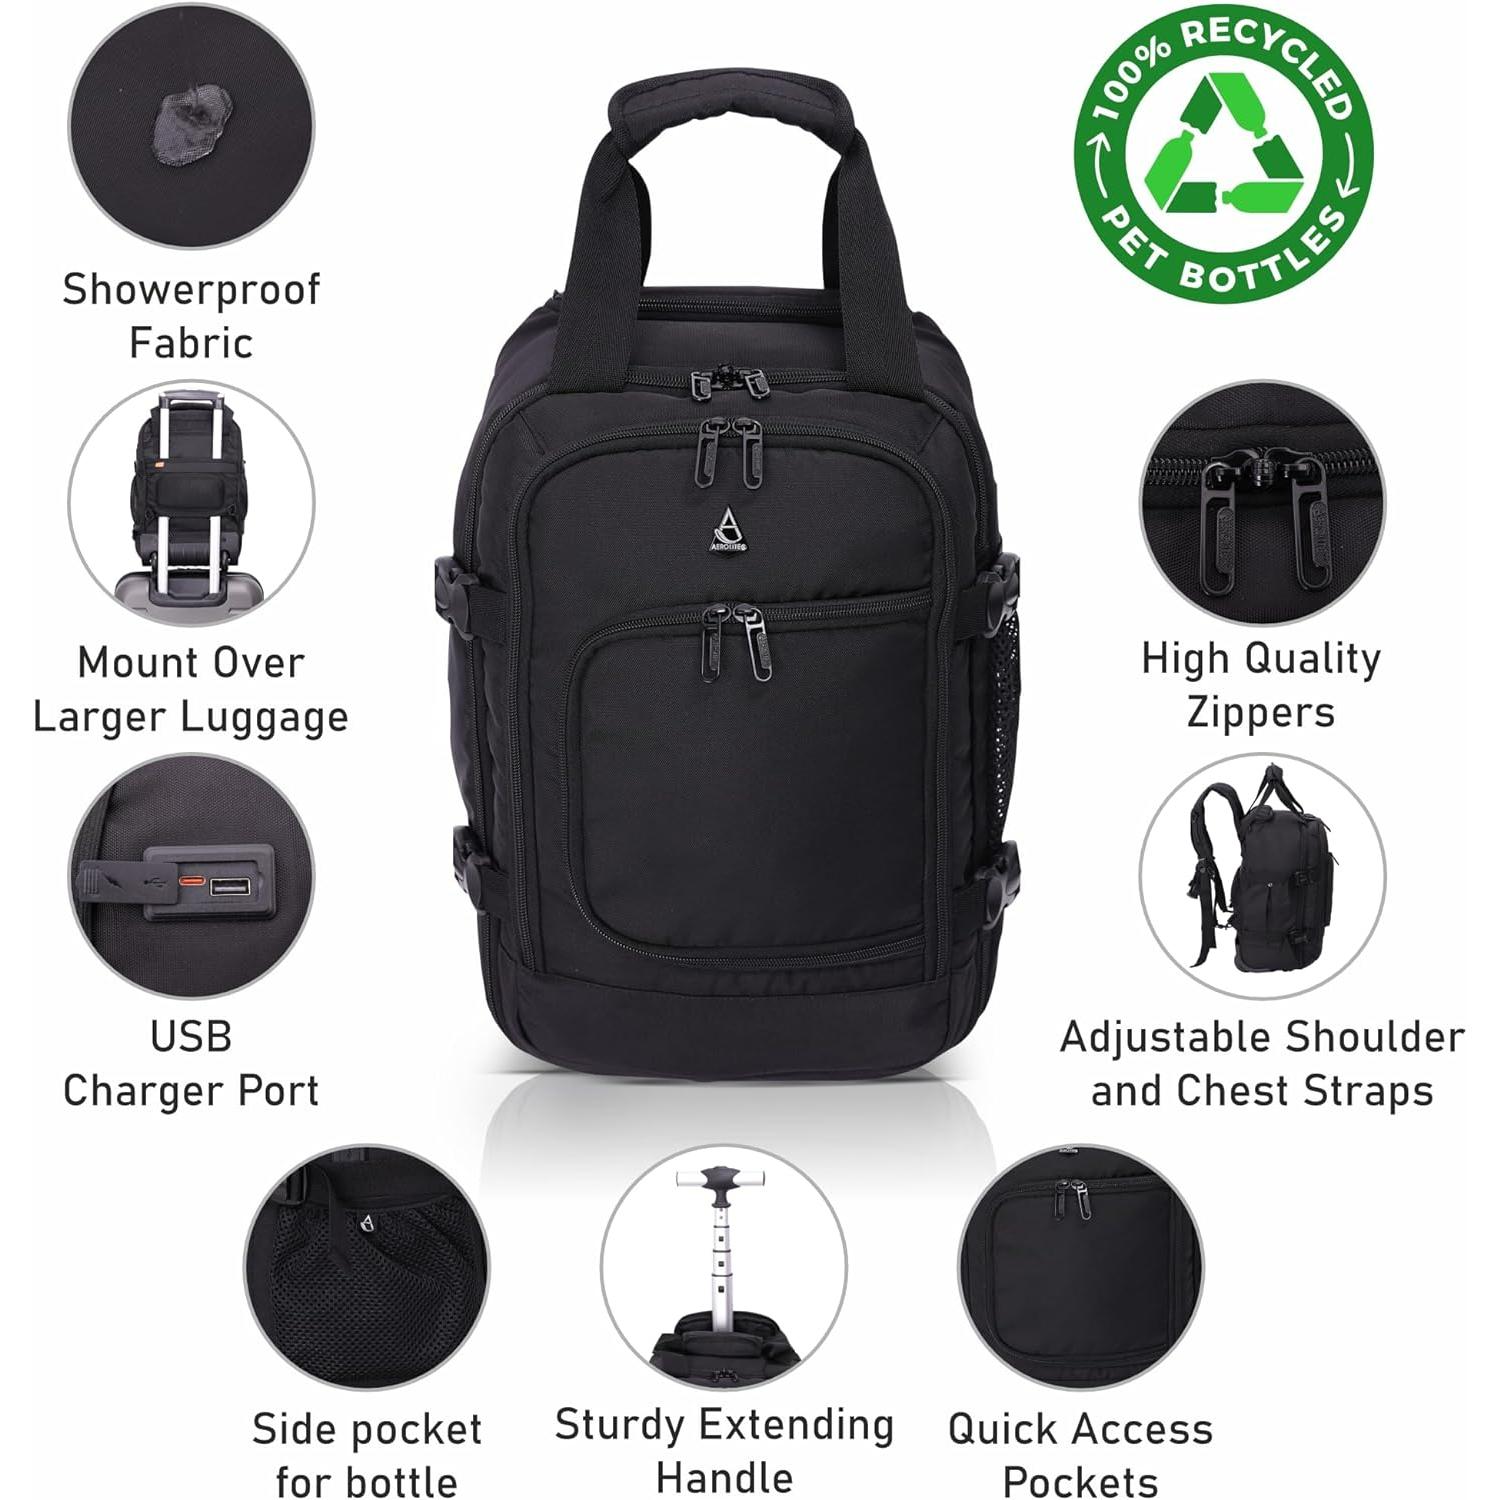 Ryanair 40x20x25 Maximum Size Hand Cabin Luggage Approved Travel Carry On  Holdall Lightweight Shoulder Bag Backpack Rucksack Bag